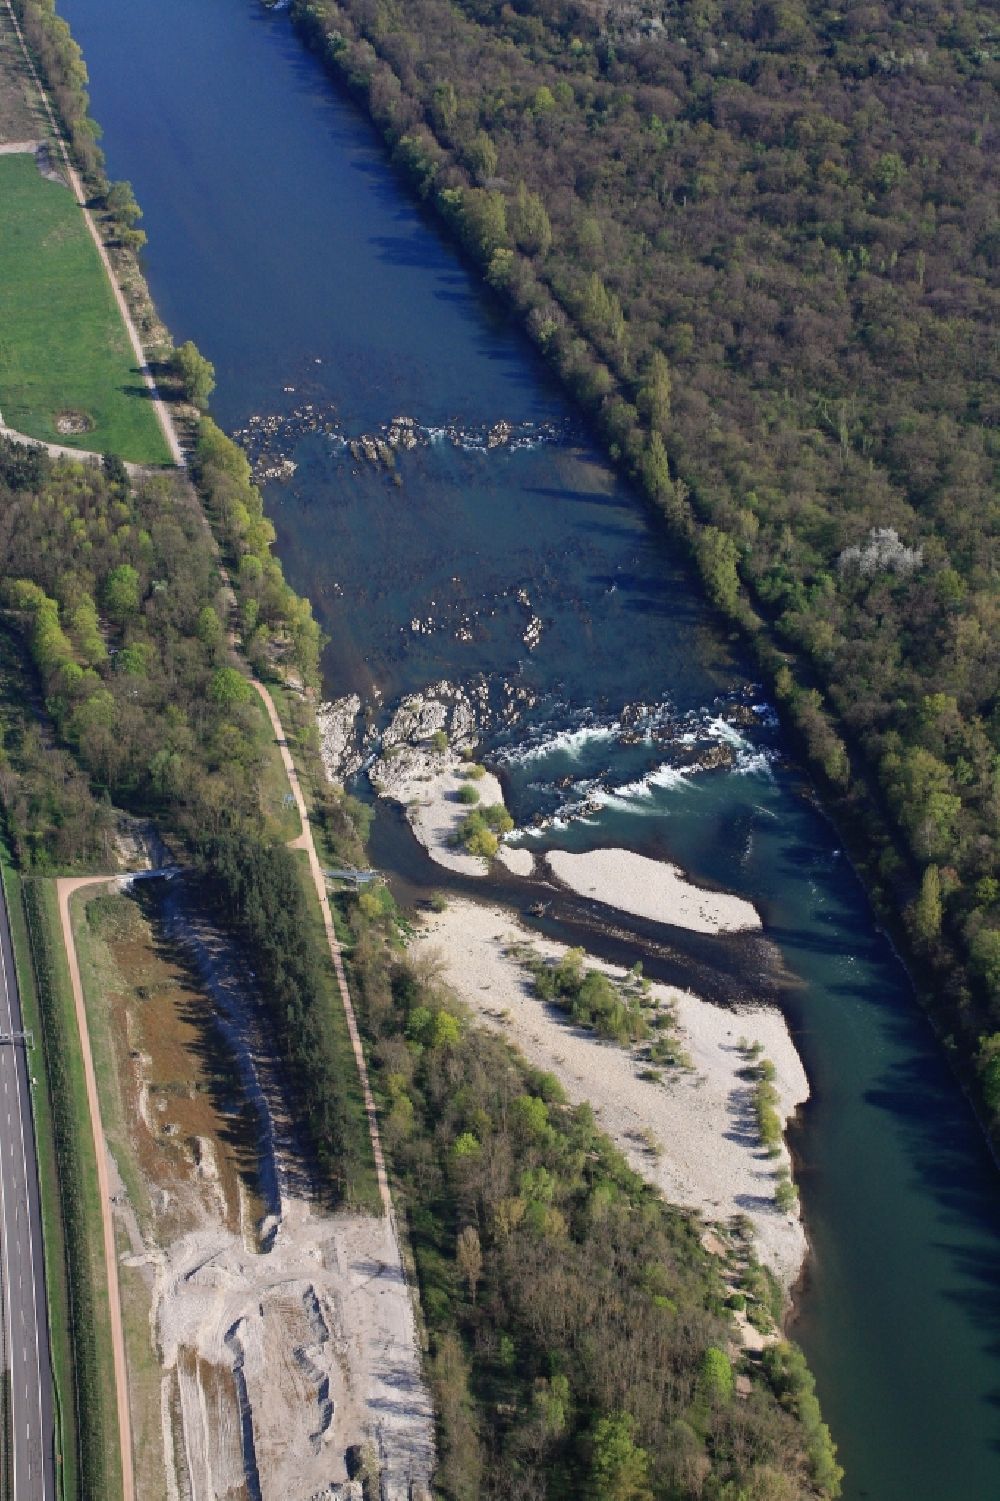 Aerial photograph Efringen-Kirchen - Popular nudist beach are the Isteiner thresholds in the river Rhine at the district Istein of Efringen-Kirchen in the state of Baden-Wuerttemberg